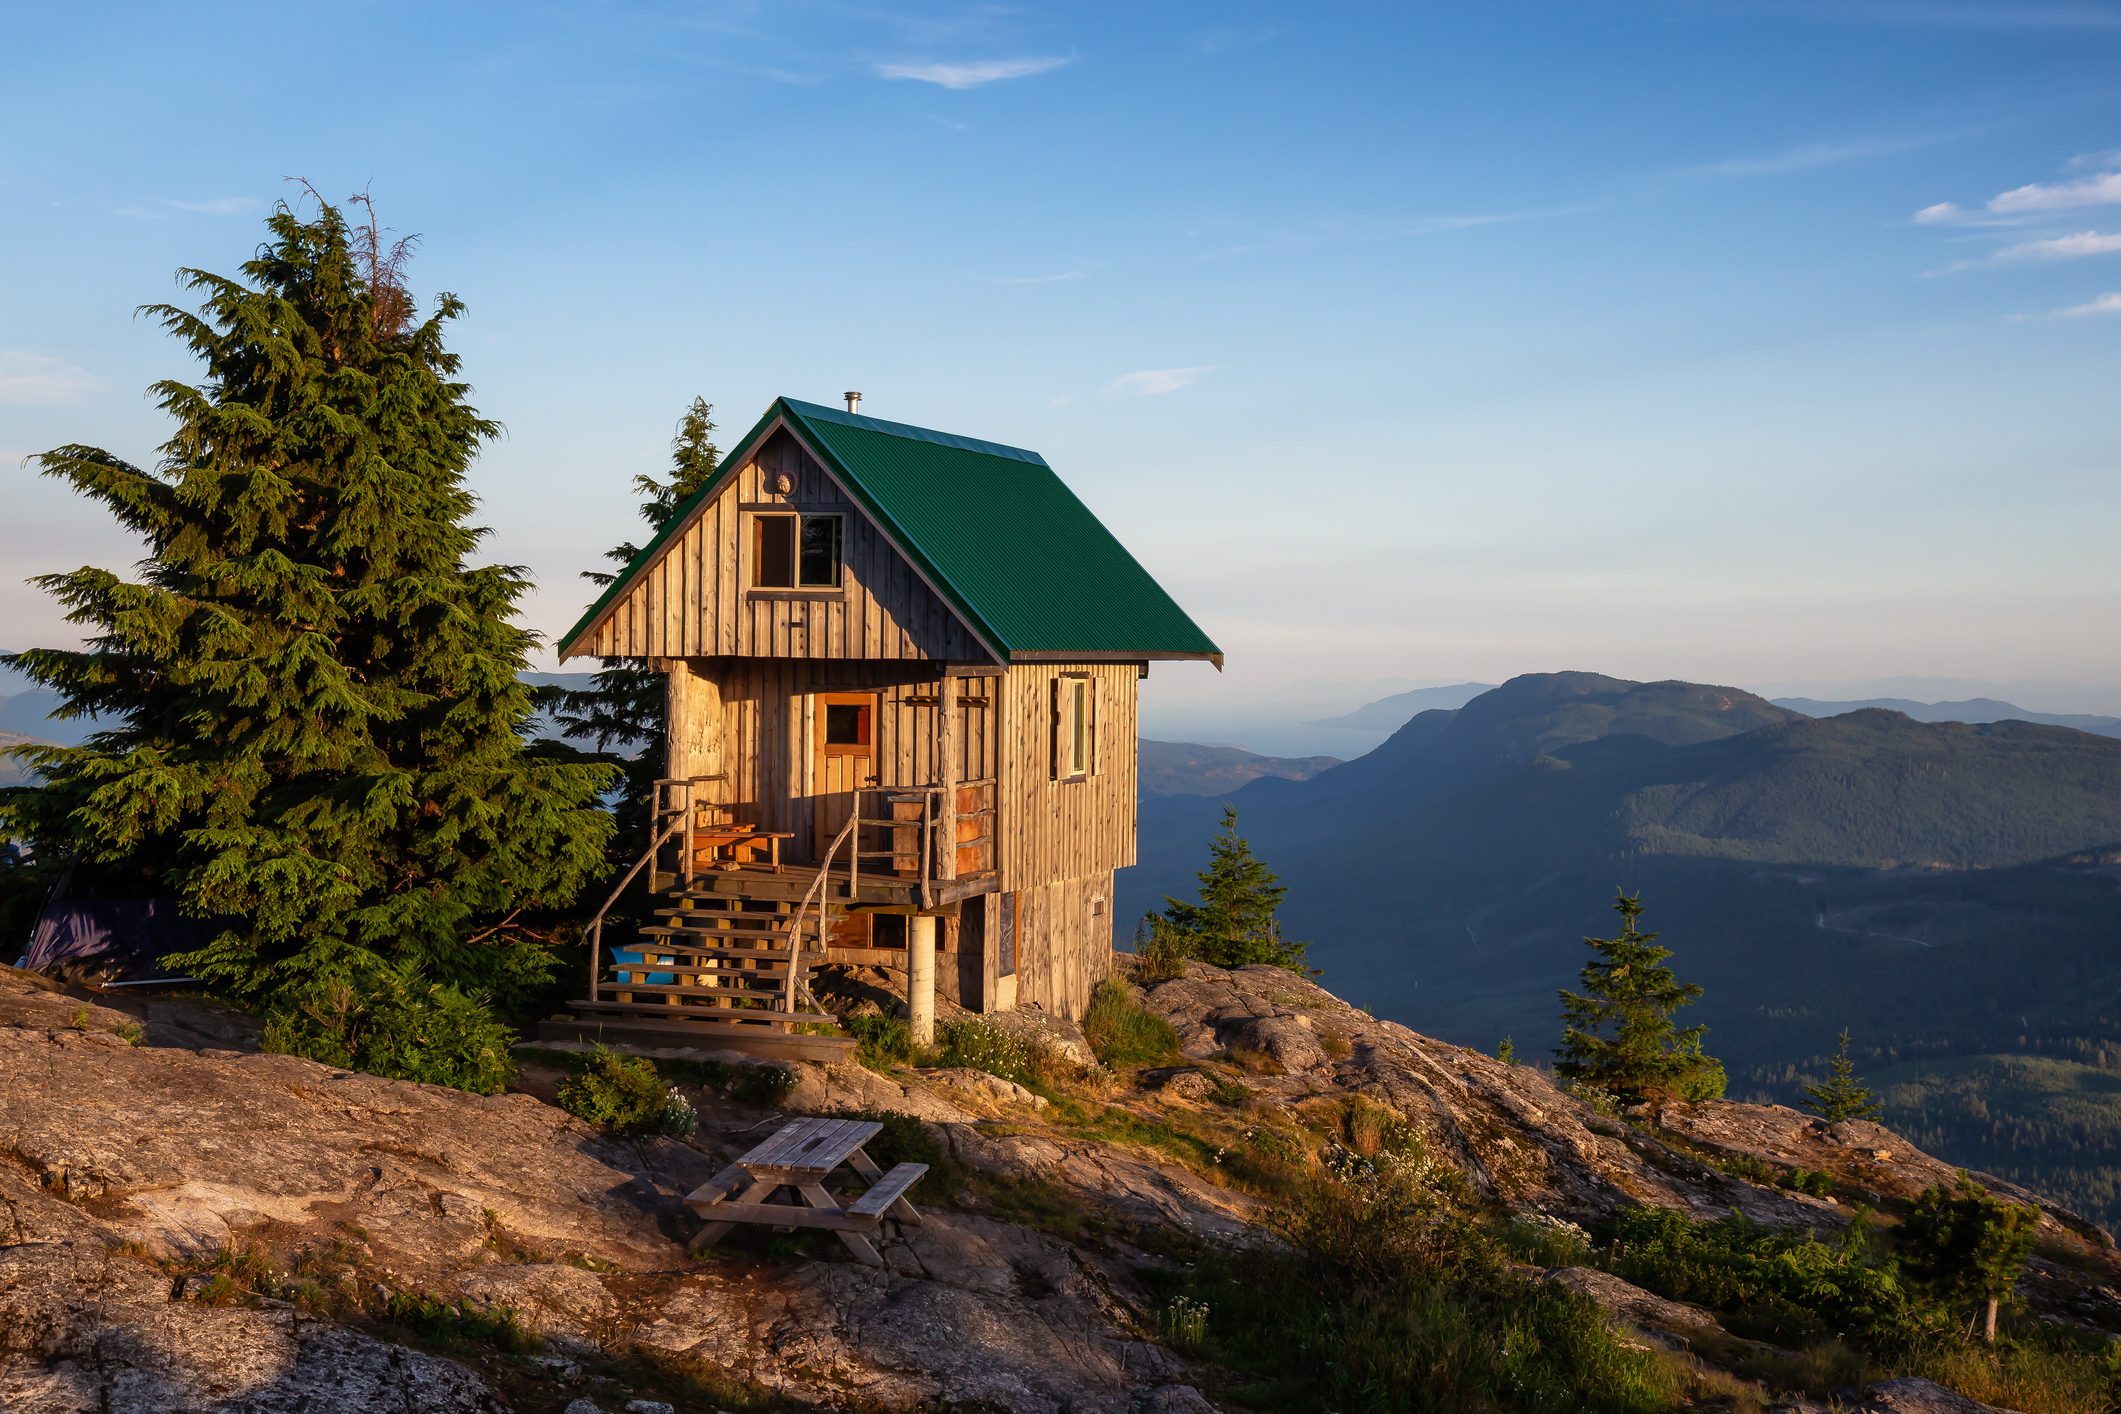 View of Tin Hat Cabin on top of a mountain during a sunny summer evening. Located near Powell River, Sunshine Coast, British Columbia, Canada.